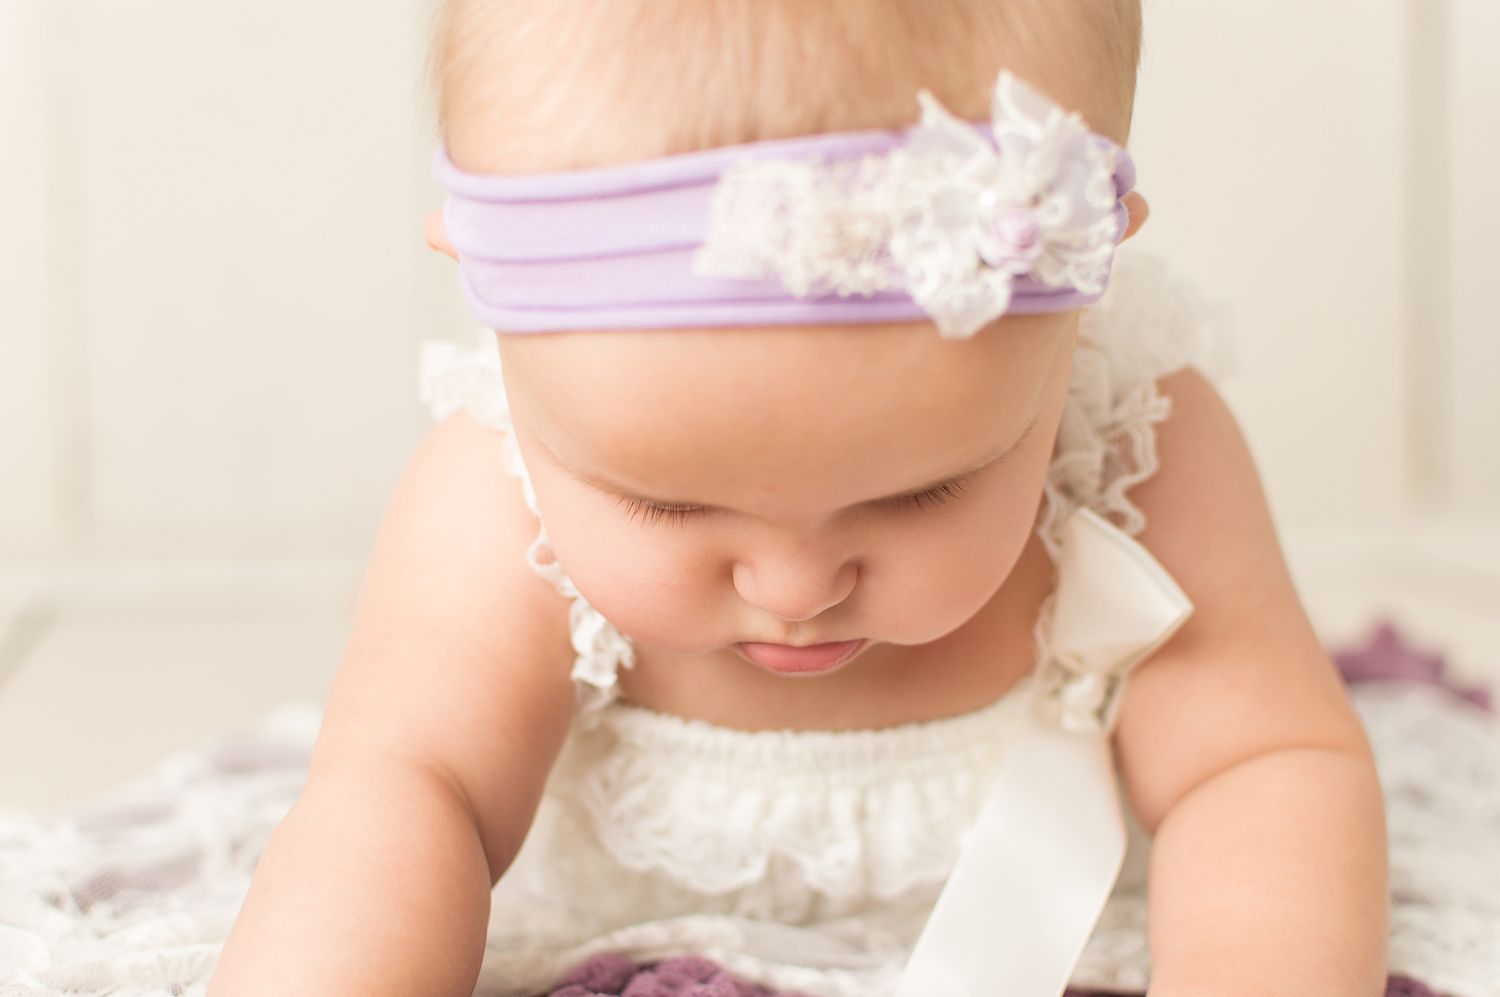 July 12 2015-Tabatha Sue Photography-Parma Heights Ohio-Cuyahoga County-Baby Photos-3 Month Baby Photos-Purple Headband with Flowers-Baby Cheeks and Lashes.jpg